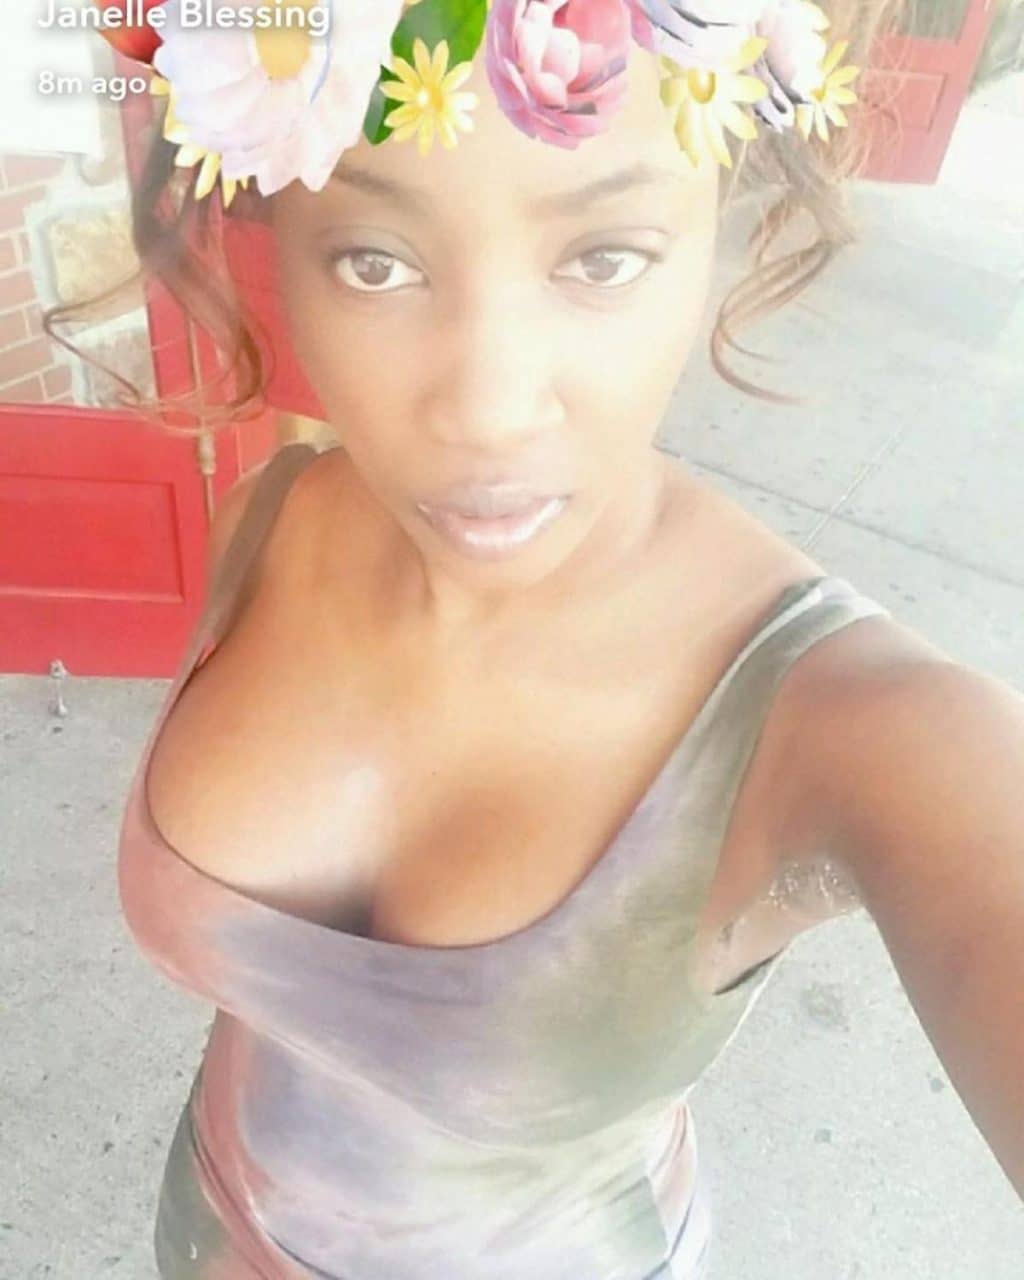 Janelle Edwards Bronx Mom Dead After Botched Plastic Surgery In Dominican Republic